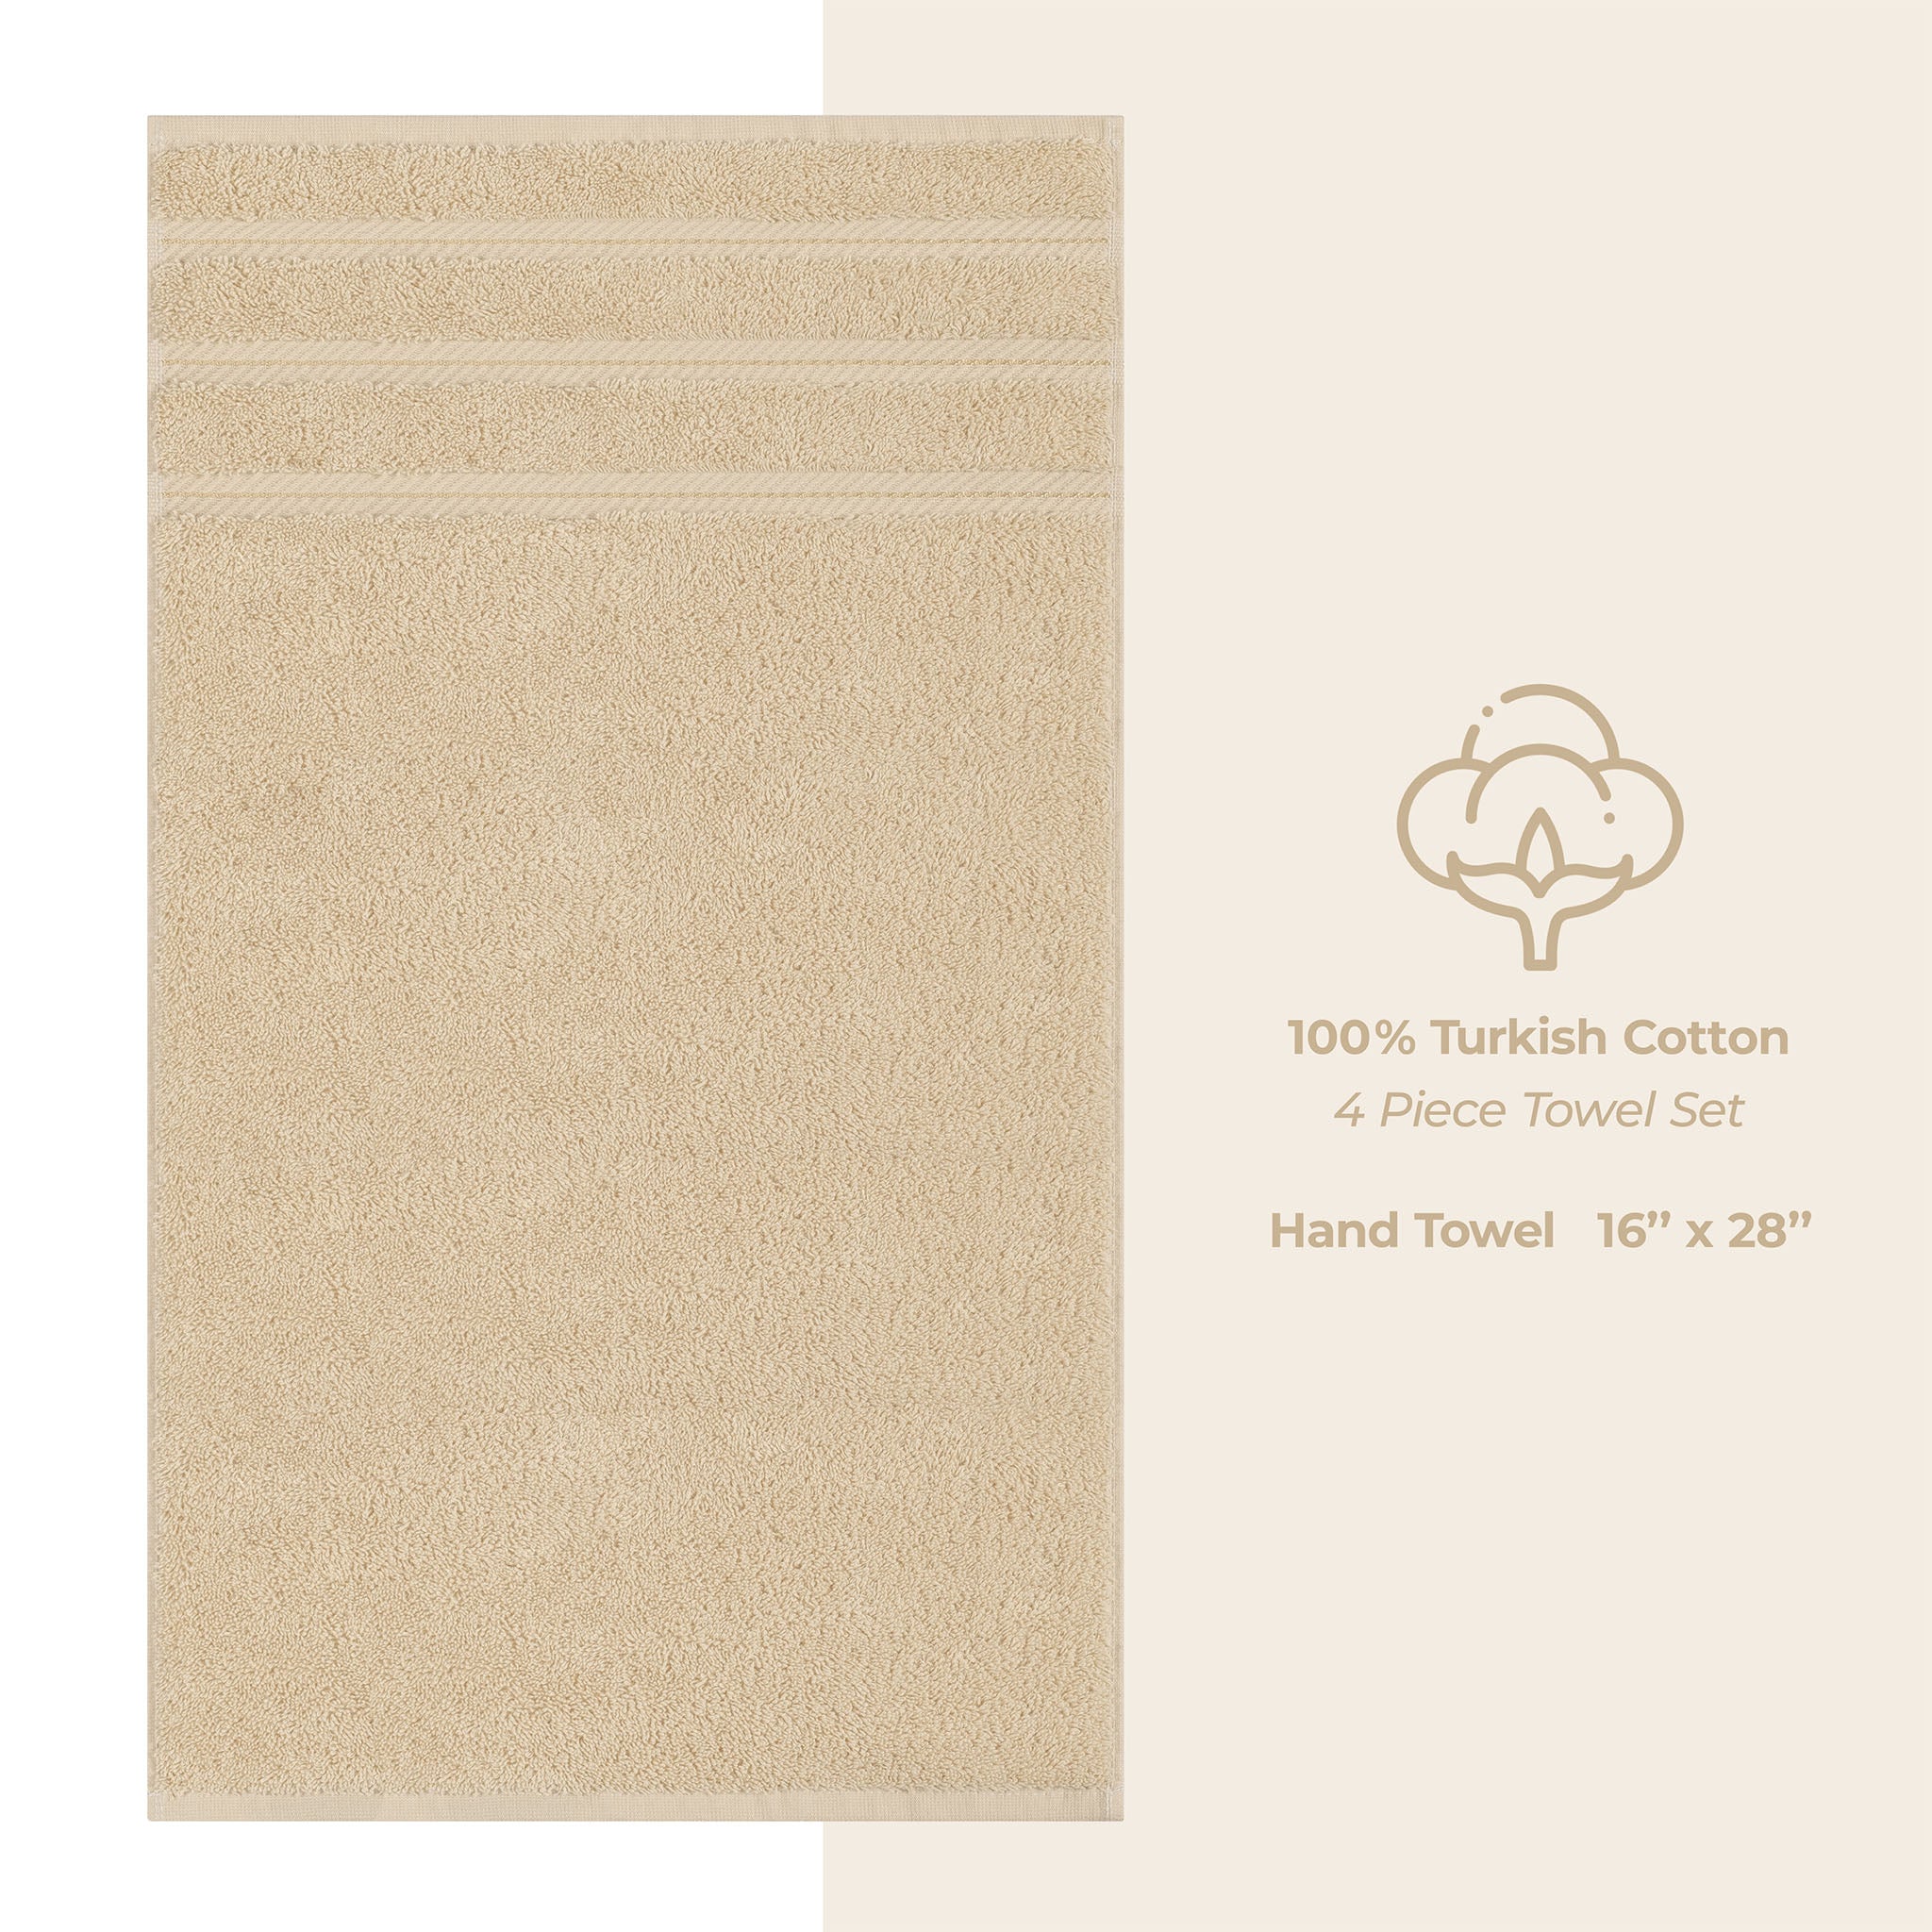  American Soft Linen 100% Turkish Cotton 4 Pack Hand Towel Set  sand-taupe-4